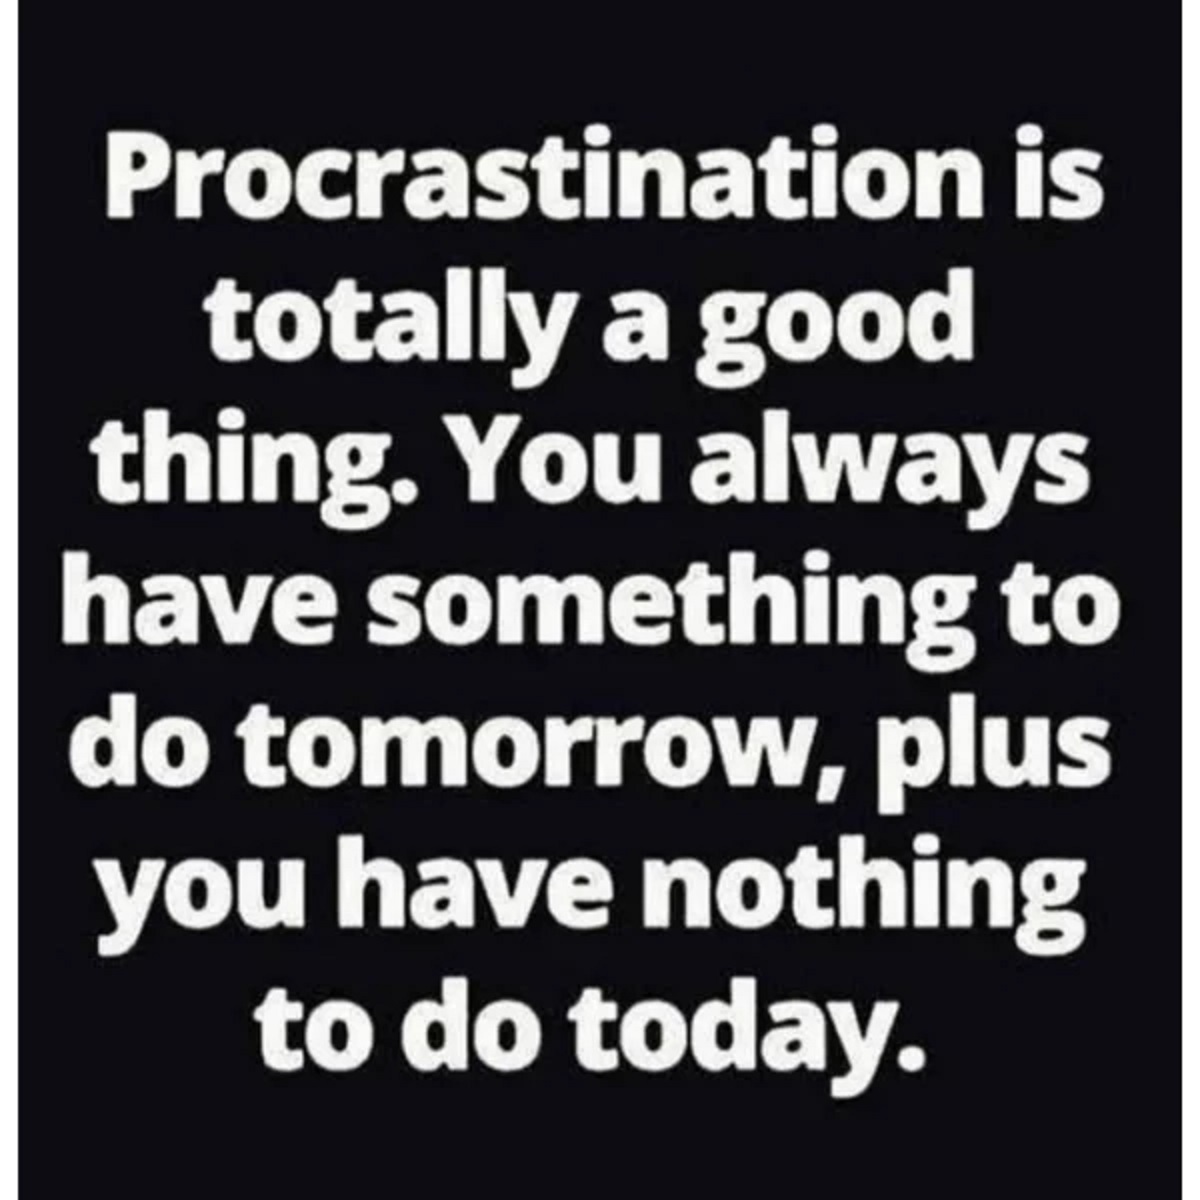 angle - Procrastination is totally a good thing. You always have something to do tomorrow, plus you have nothing to do today.